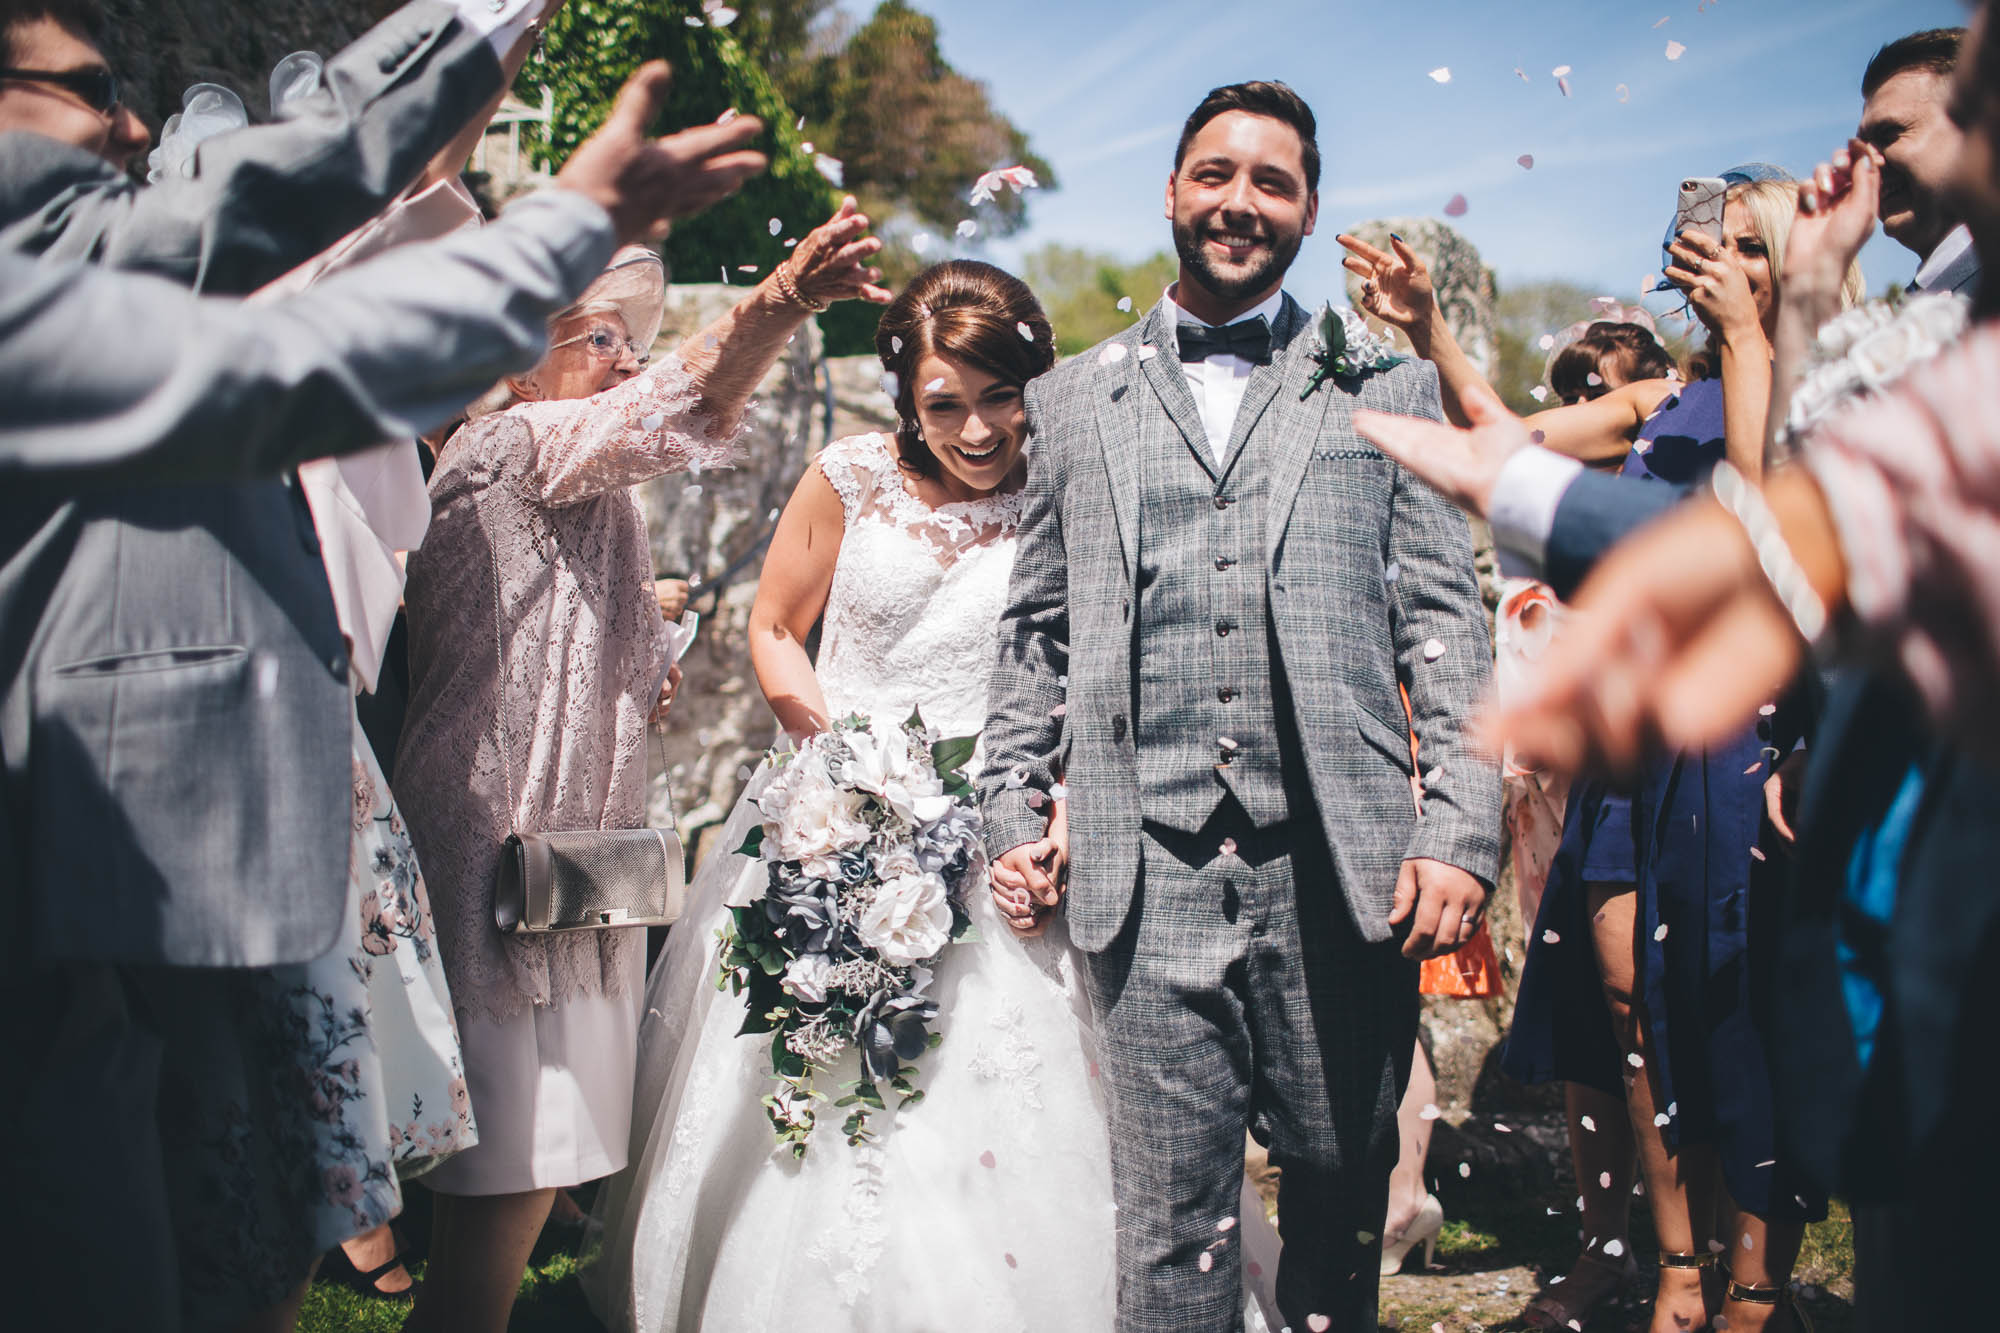 Smiley Bride and Groom are showered with confetti and greeted with cheers as they leave the church as a married couple for the first time